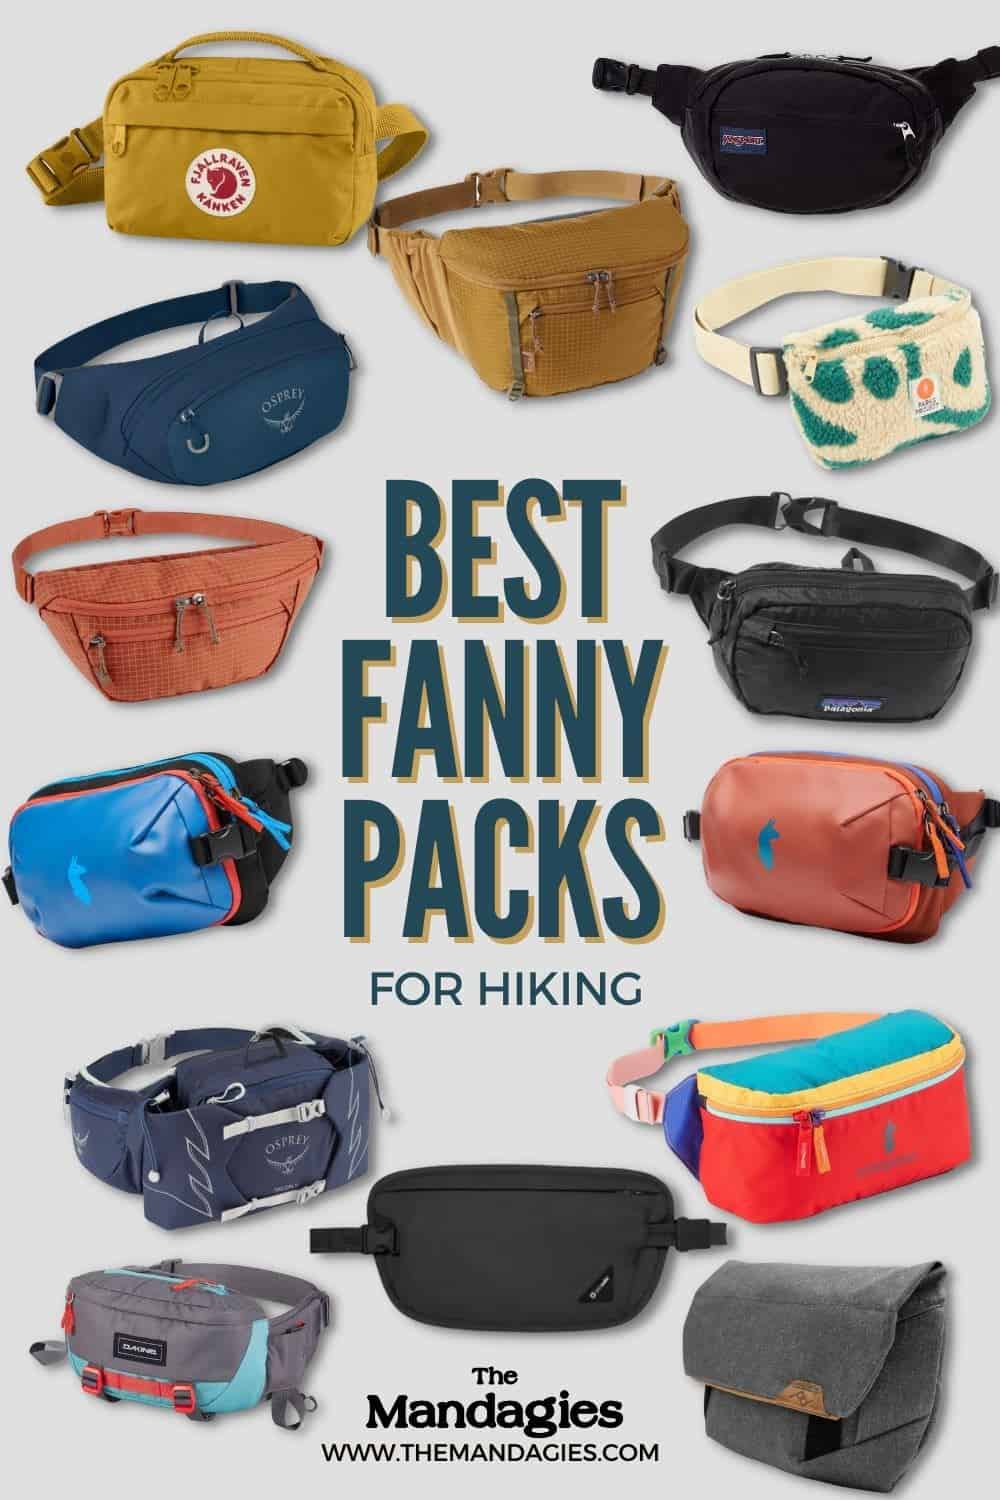 bagværk Nedgang Ambient The 14 Best Fanny Packs For Hiking and Outdoor Adventure - The Mandagies